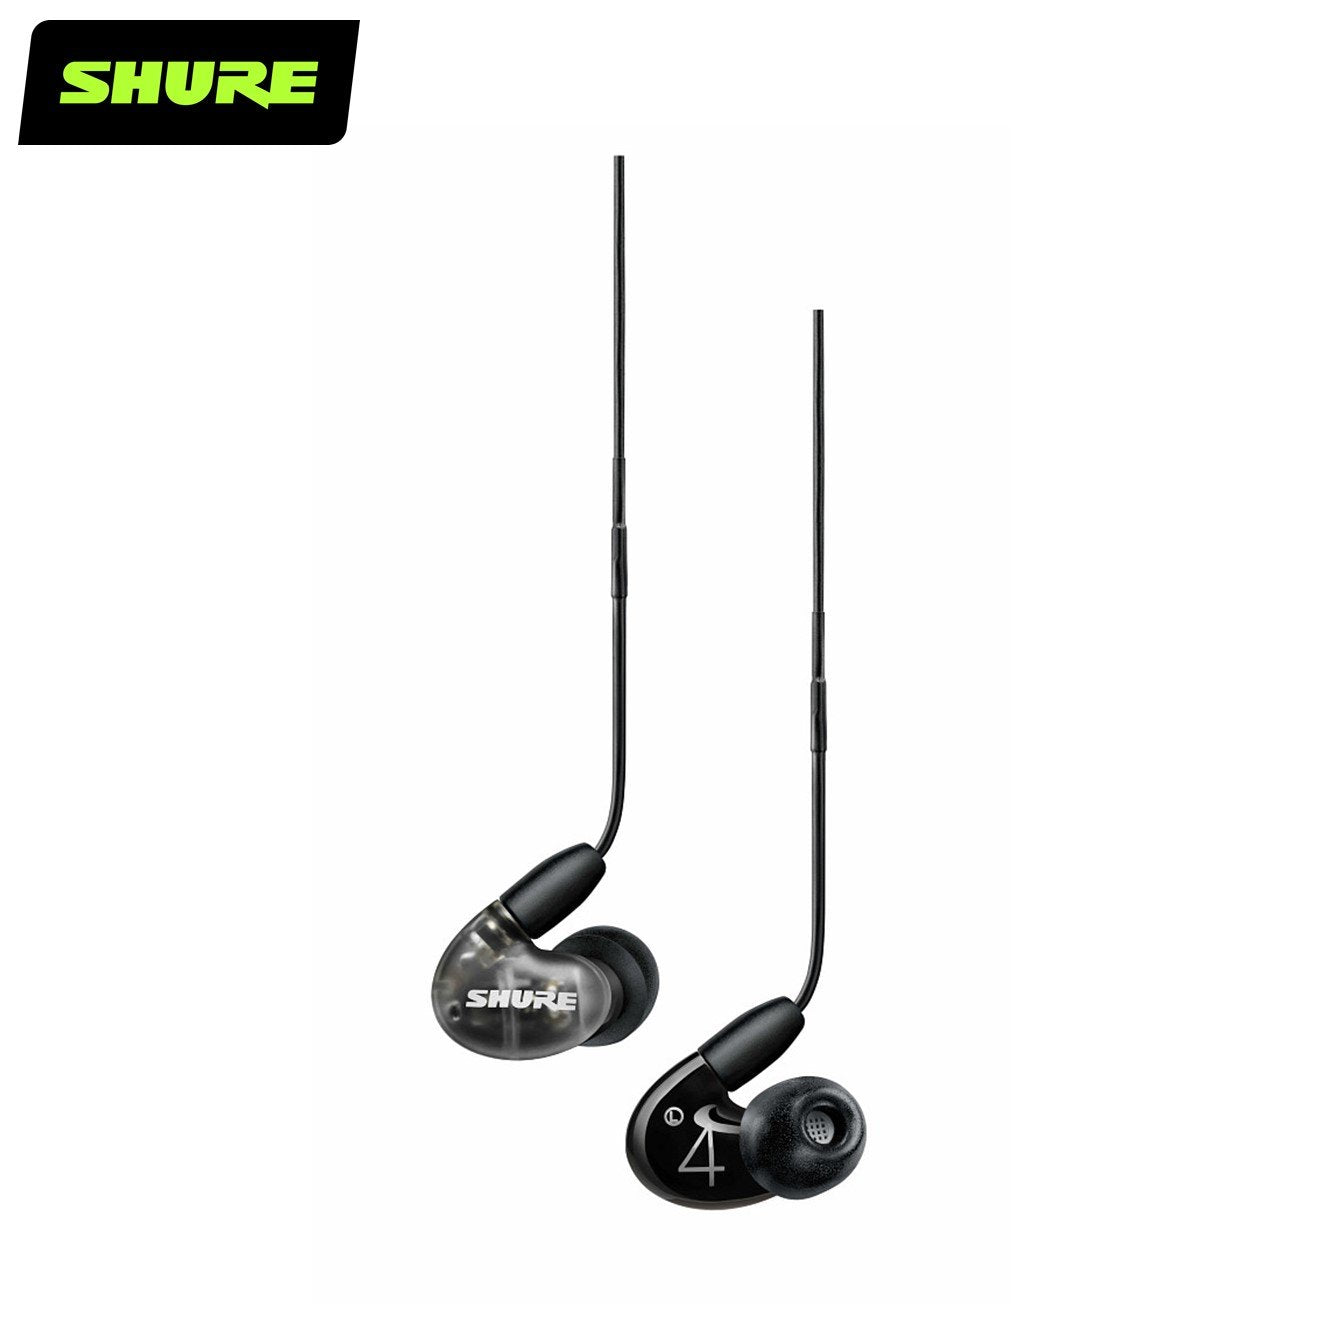  Shure AONIC 215 Wired Sound Isolating Earbuds, Clear Sound,  Black & RMCE-UNI Universal Communication Cable for Detachable SE Sound  Isolating Earphones : Electronics